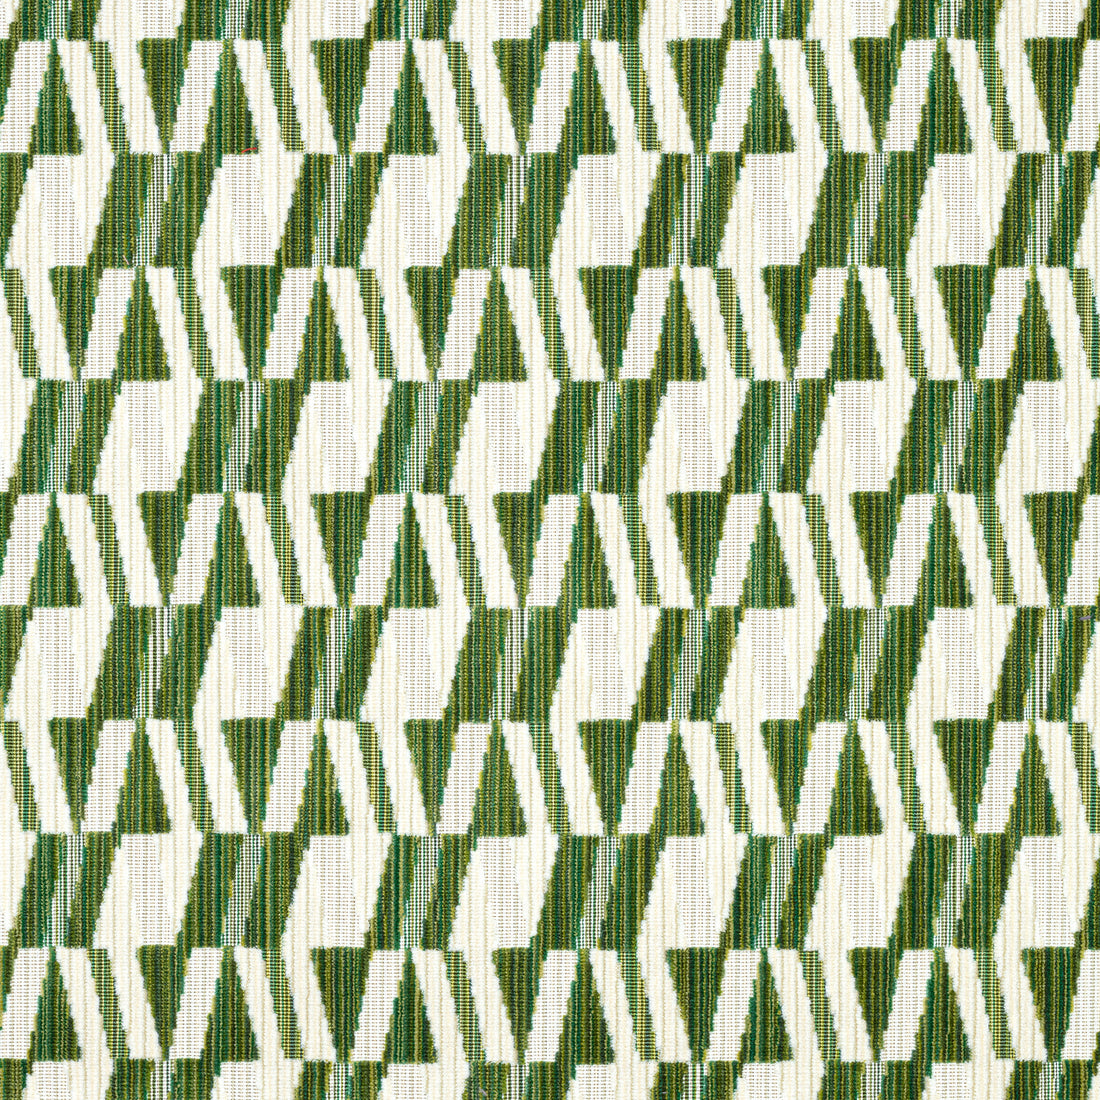 Bossa Nova Velvet fabric in emerald color - pattern number W72809 - by Thibaut in the Woven Resource 13: Fusion Velvets collection